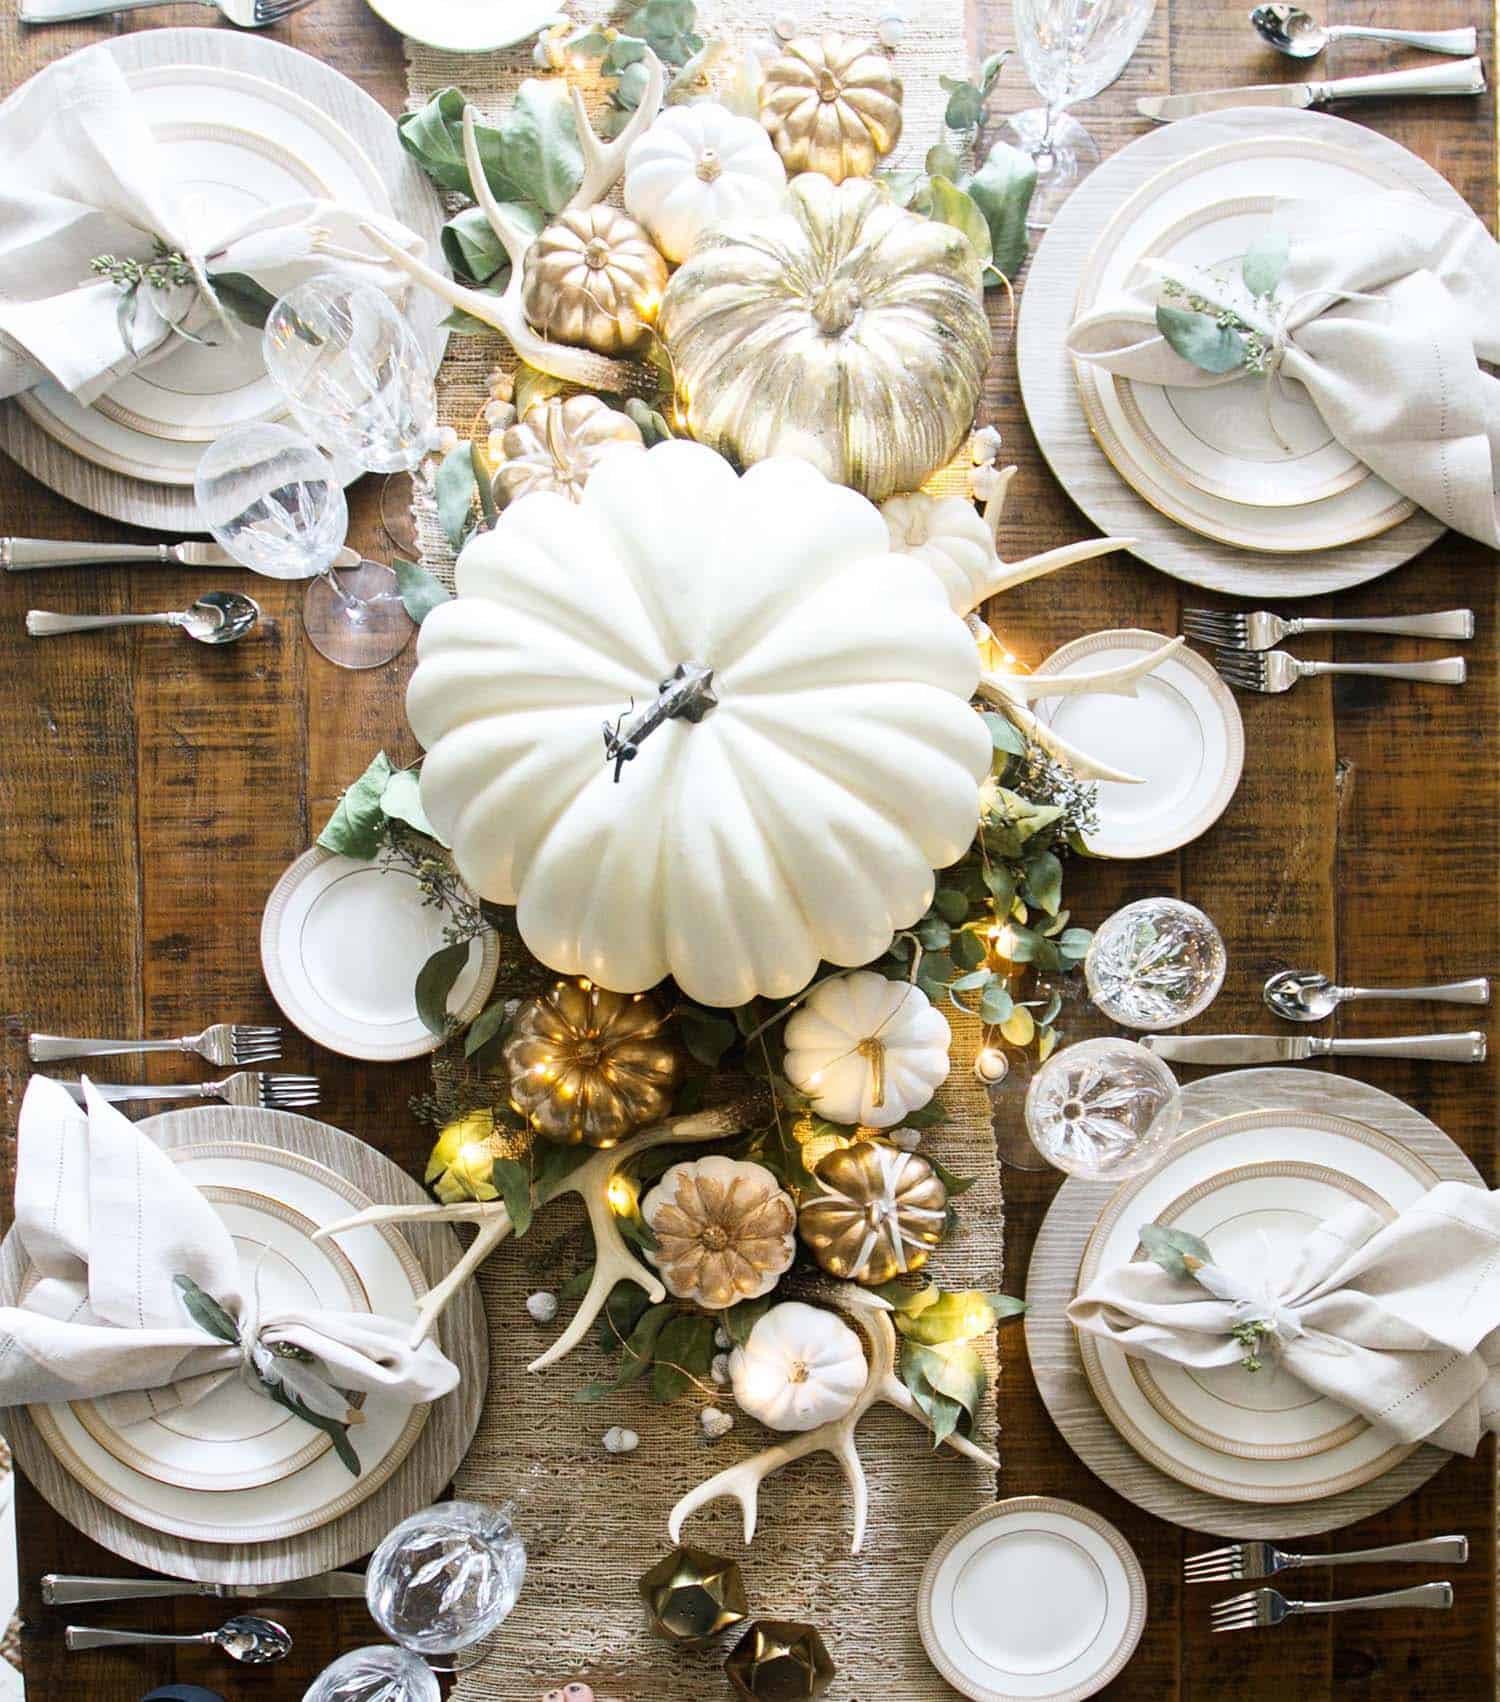 25+ Beautiful And Elegant Centerpiece Ideas For A ...